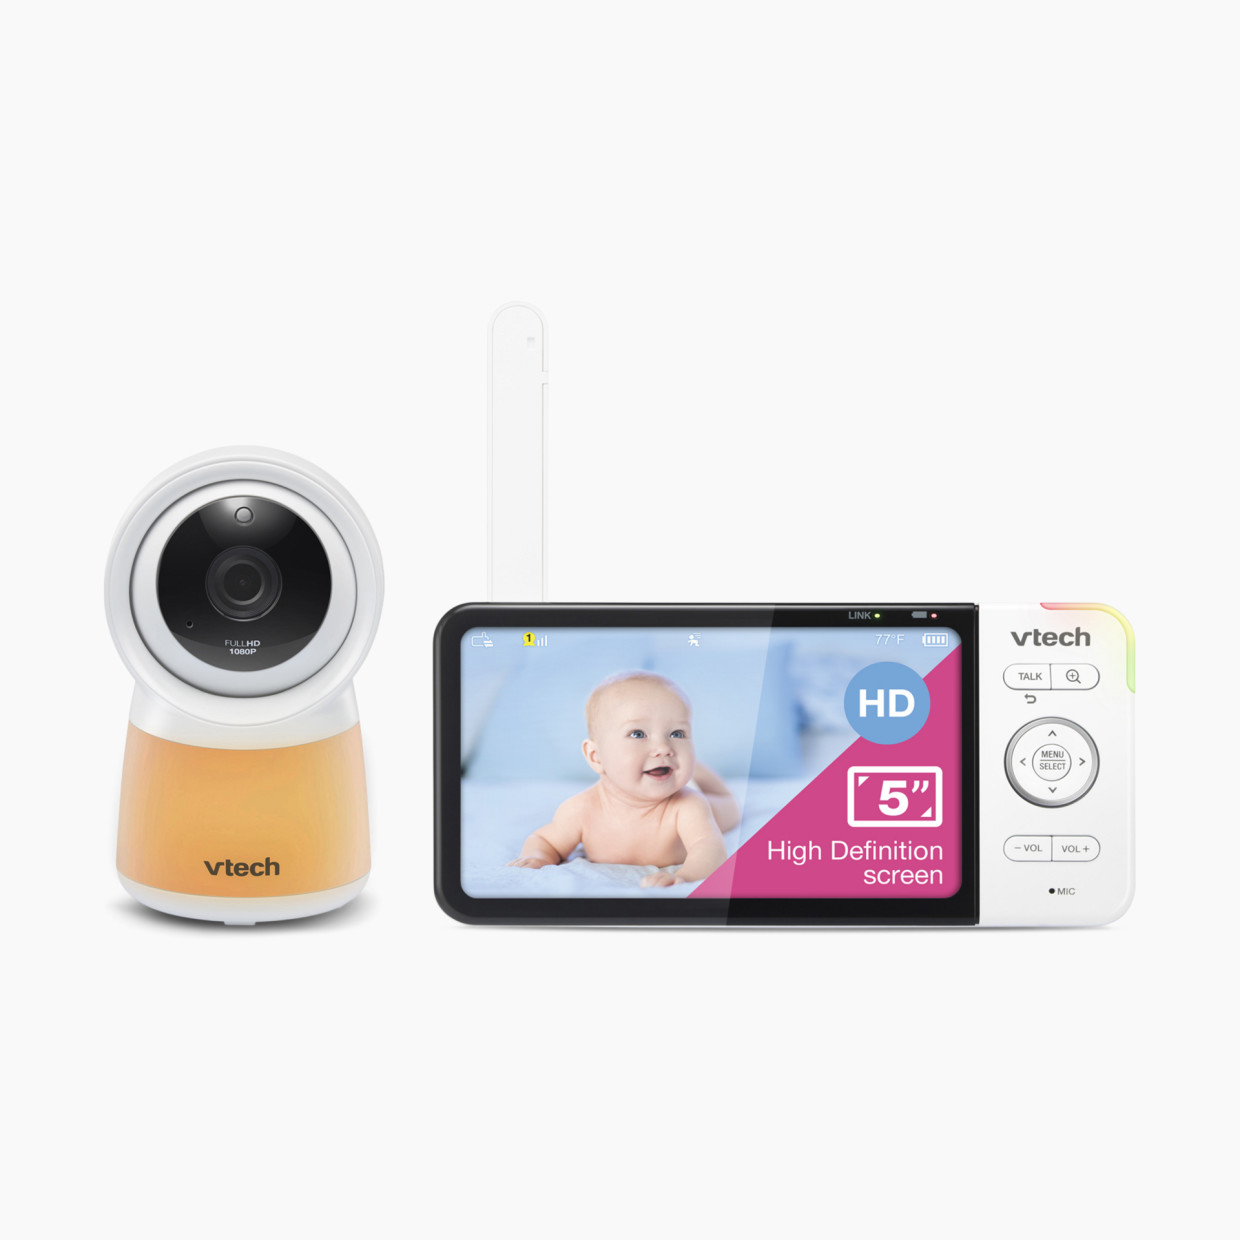 VTech 2.8” Digital Video Baby Monitor with Night Light White